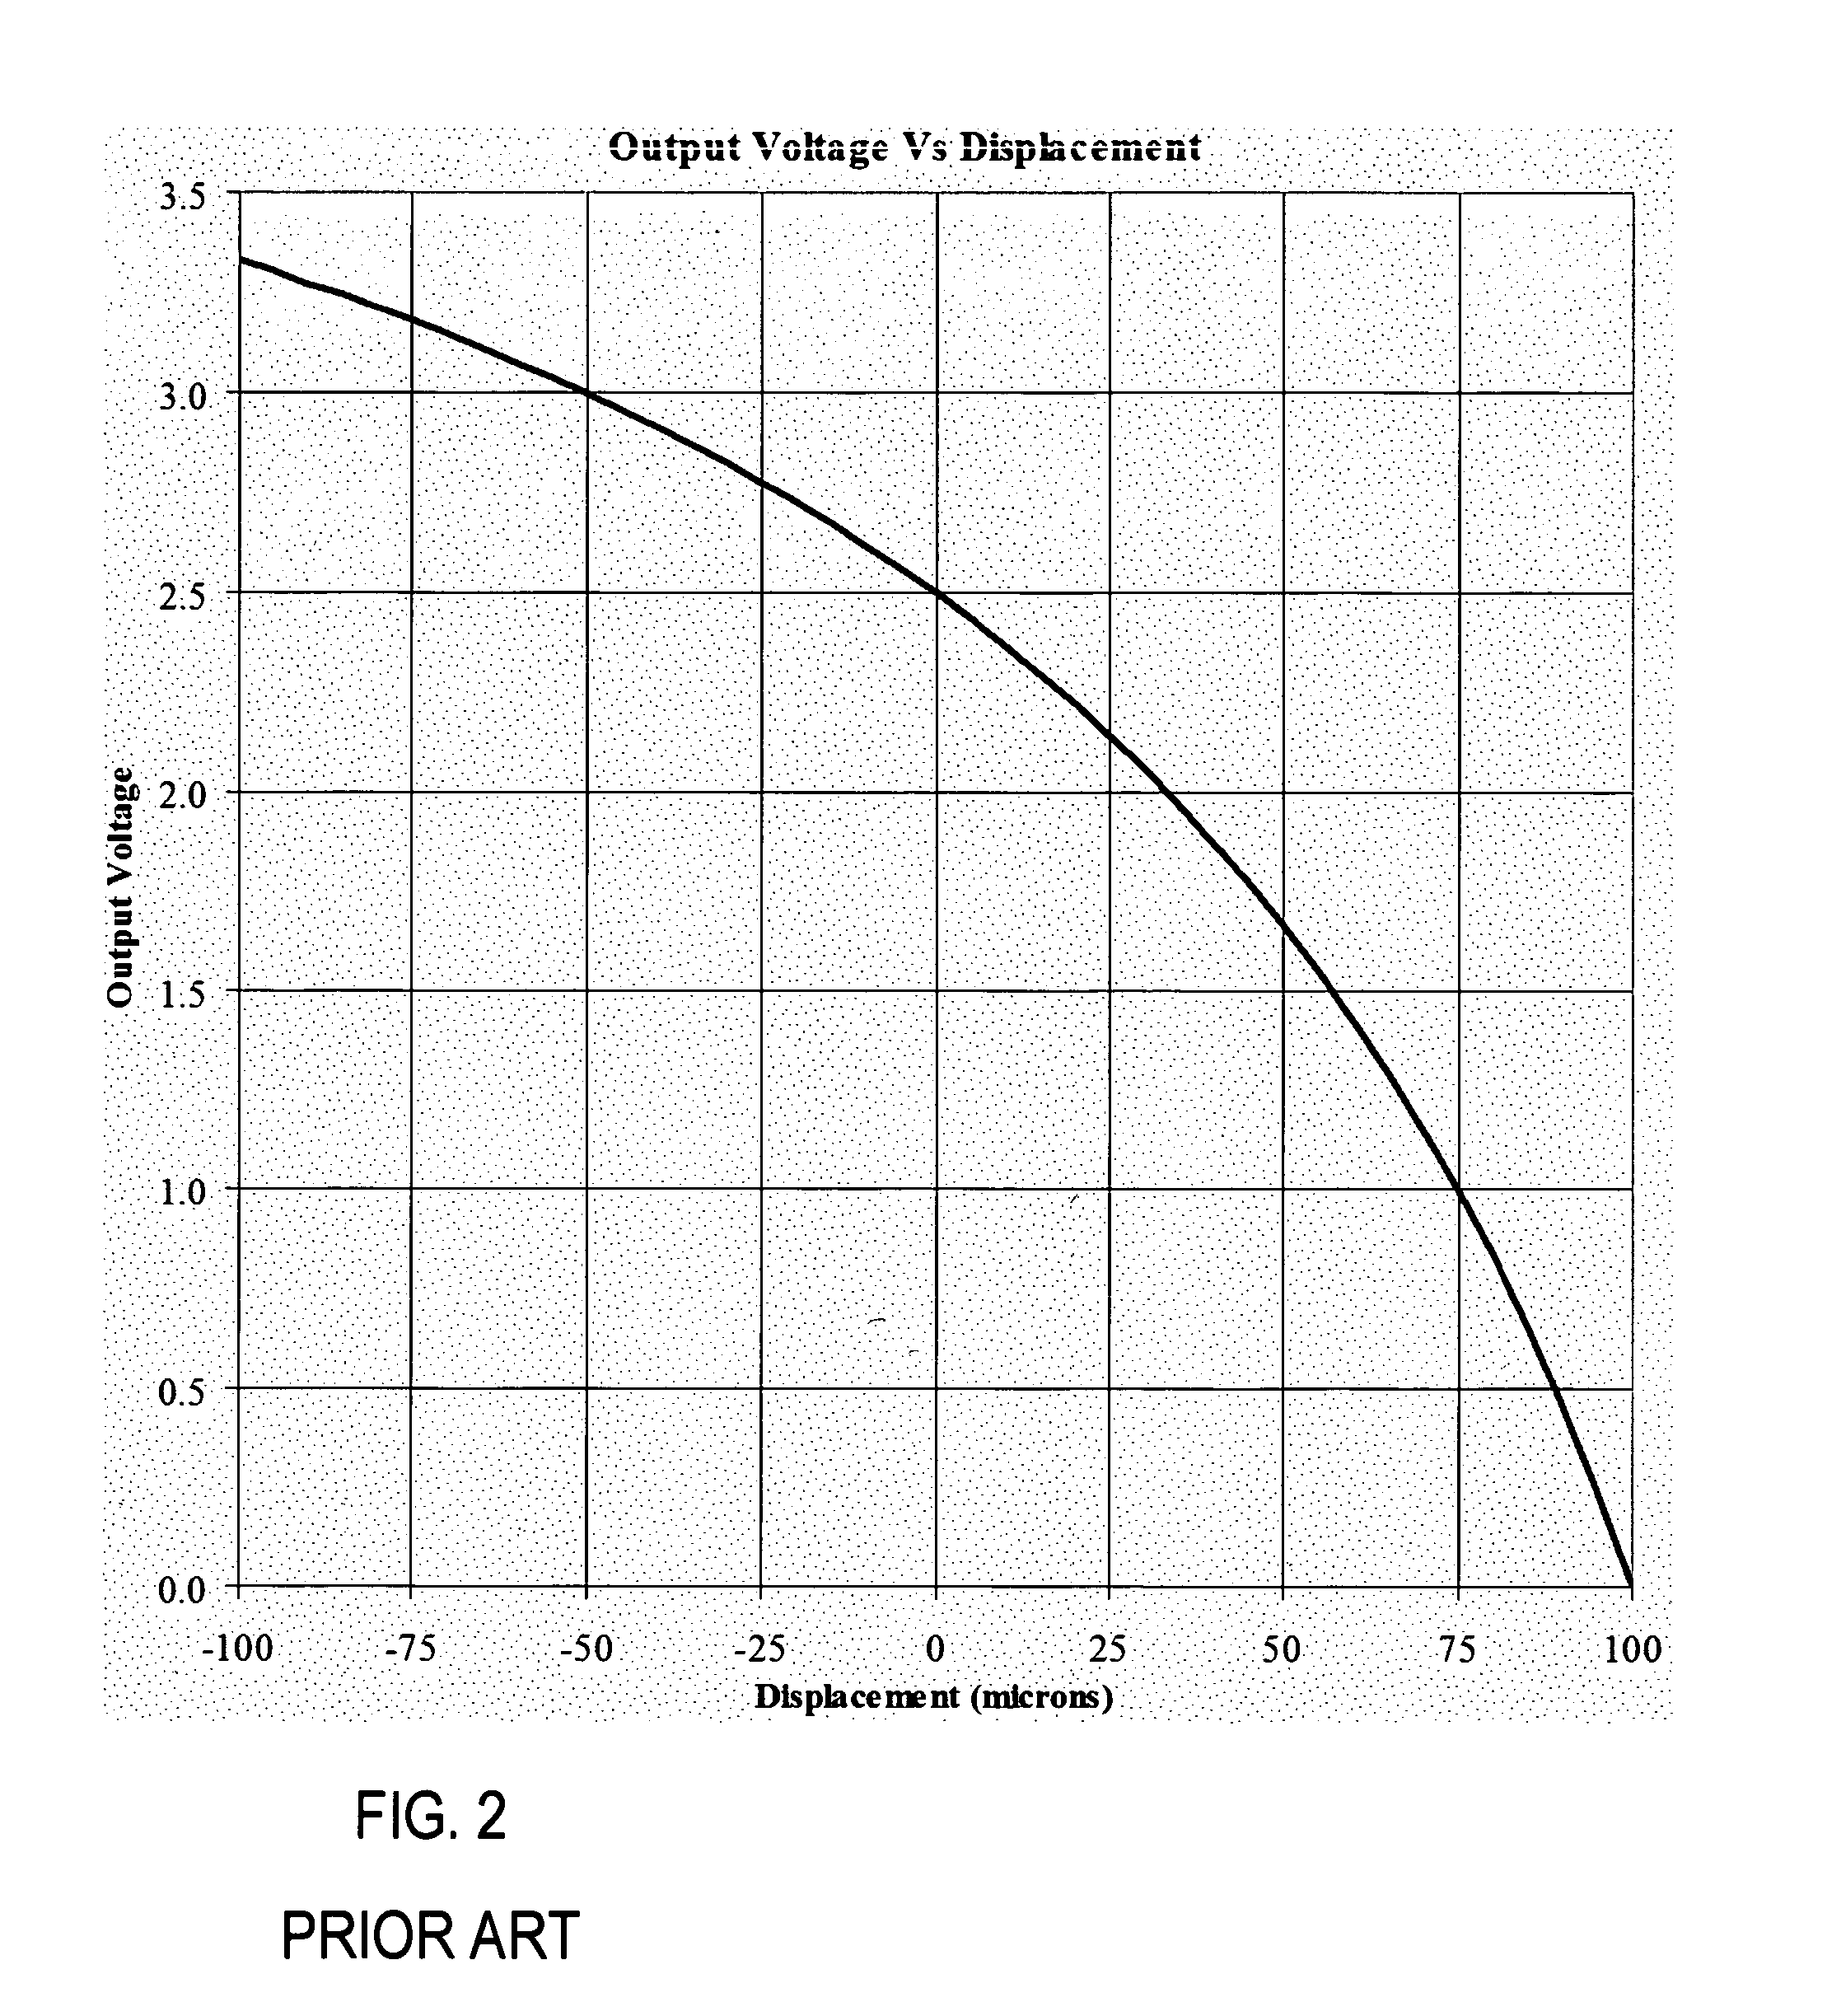 High-performance drive circuitry for capacitive transducers